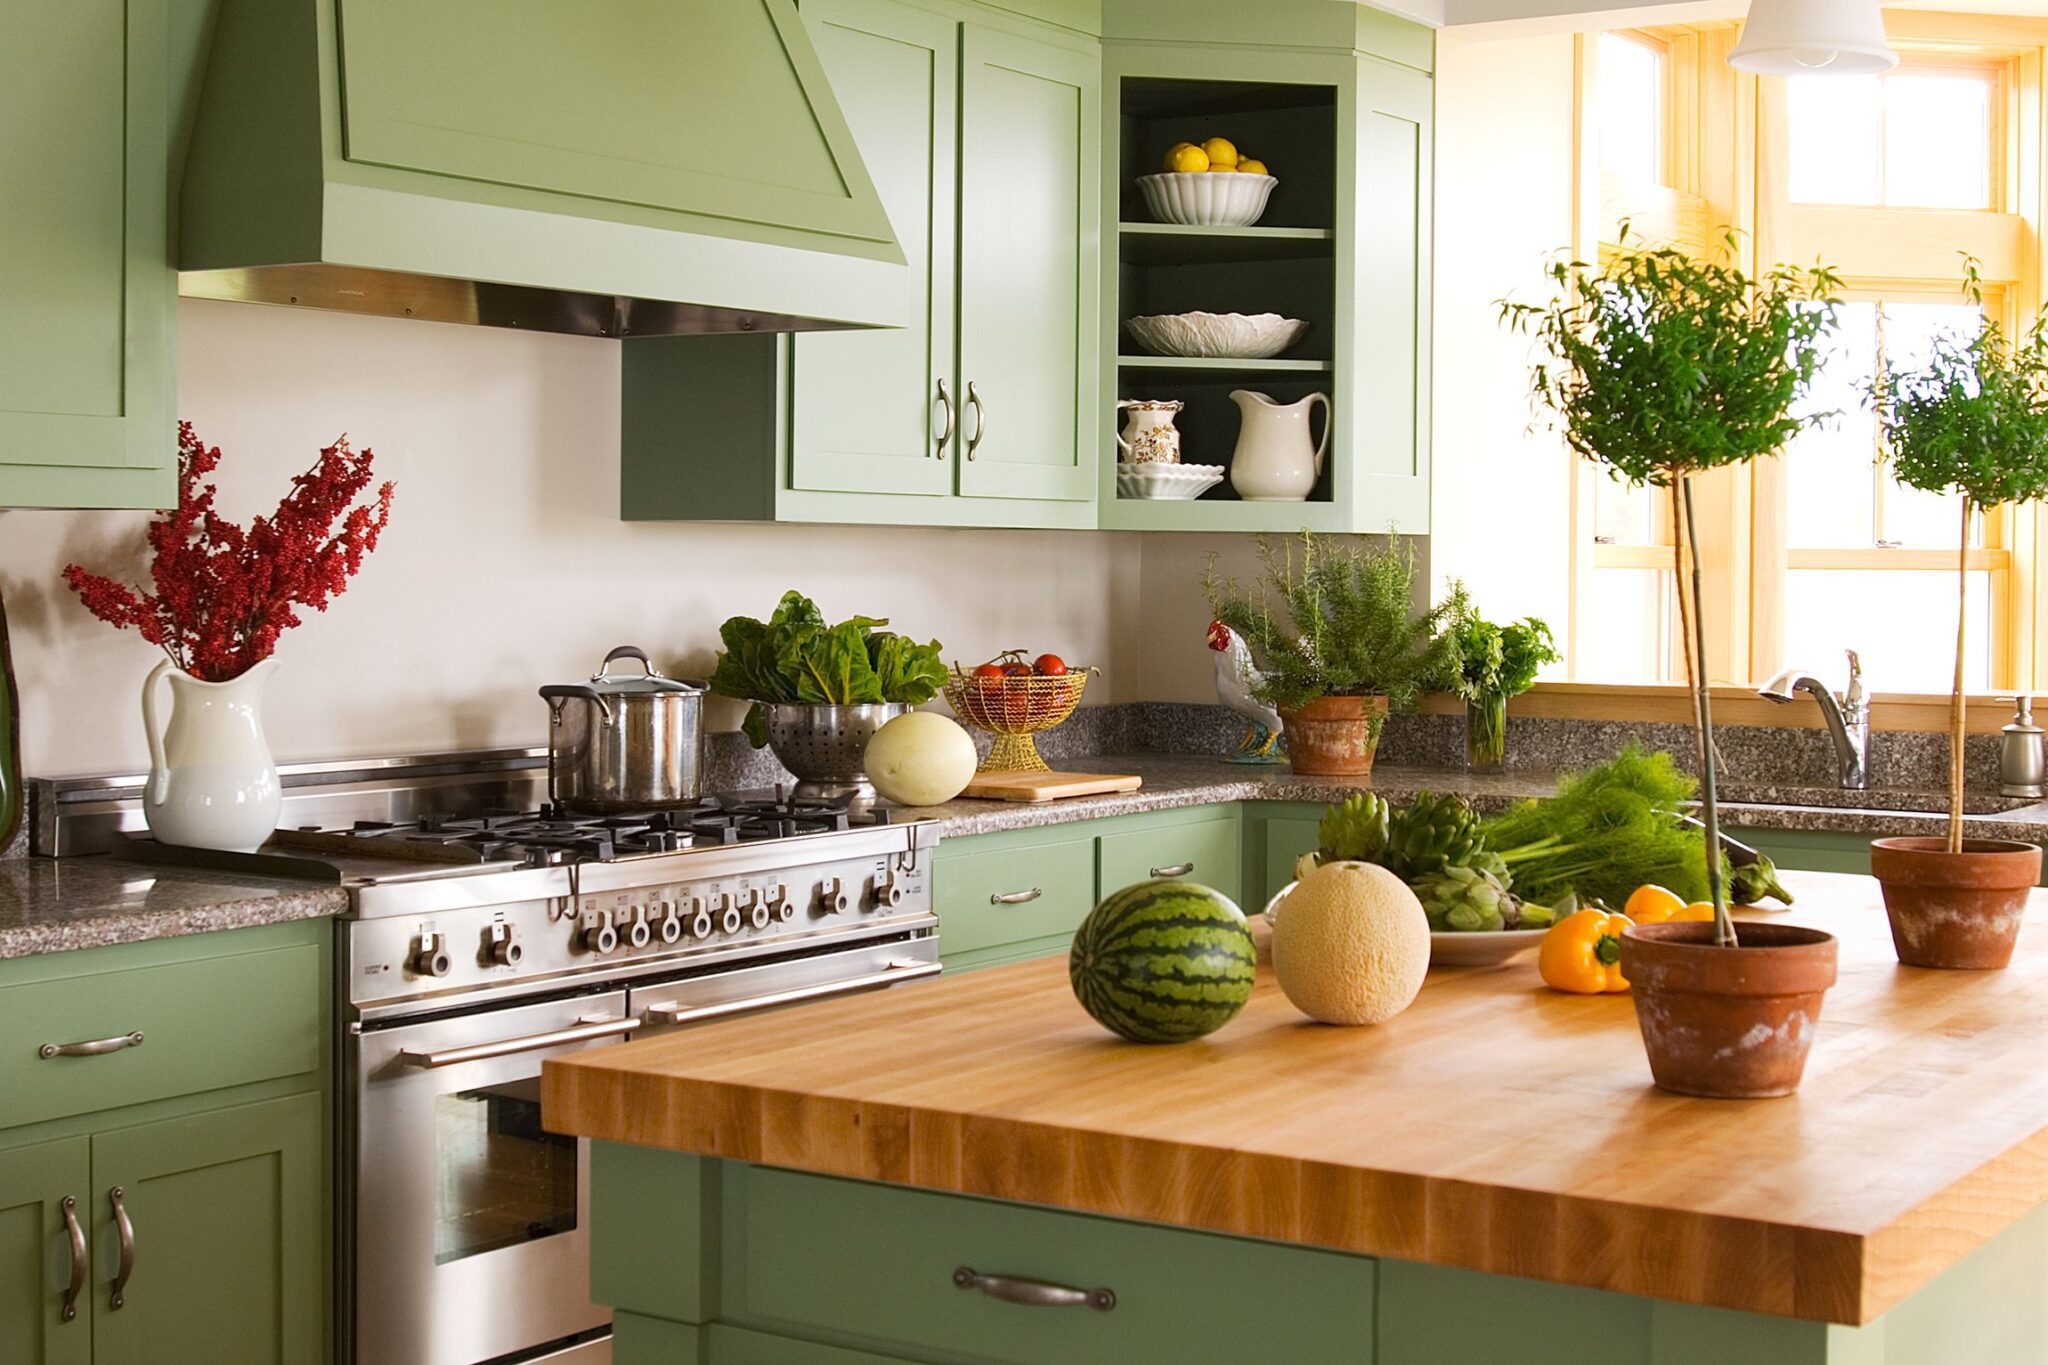 Is Granite Food Safe? Exploring the Health Risk of Granite in Countertops and Cookware